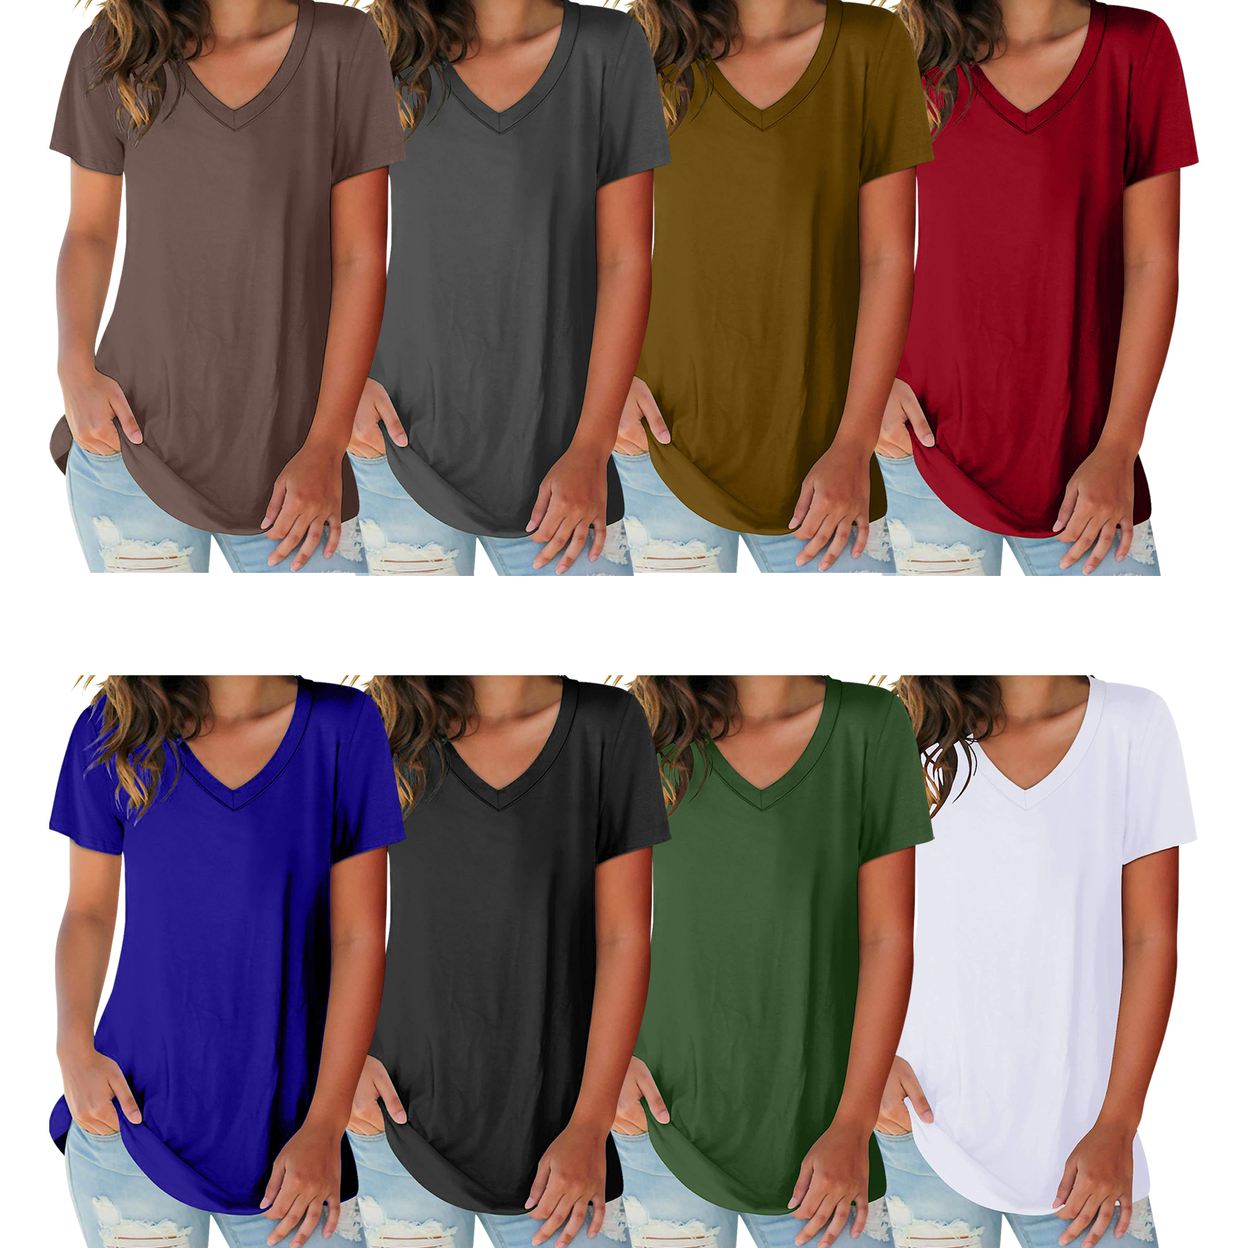 2-Pack: Women's Ultra Soft Smooth Cotton Blend Basic V-Neck Short Sleeve Shirts - White & Brown, X-large